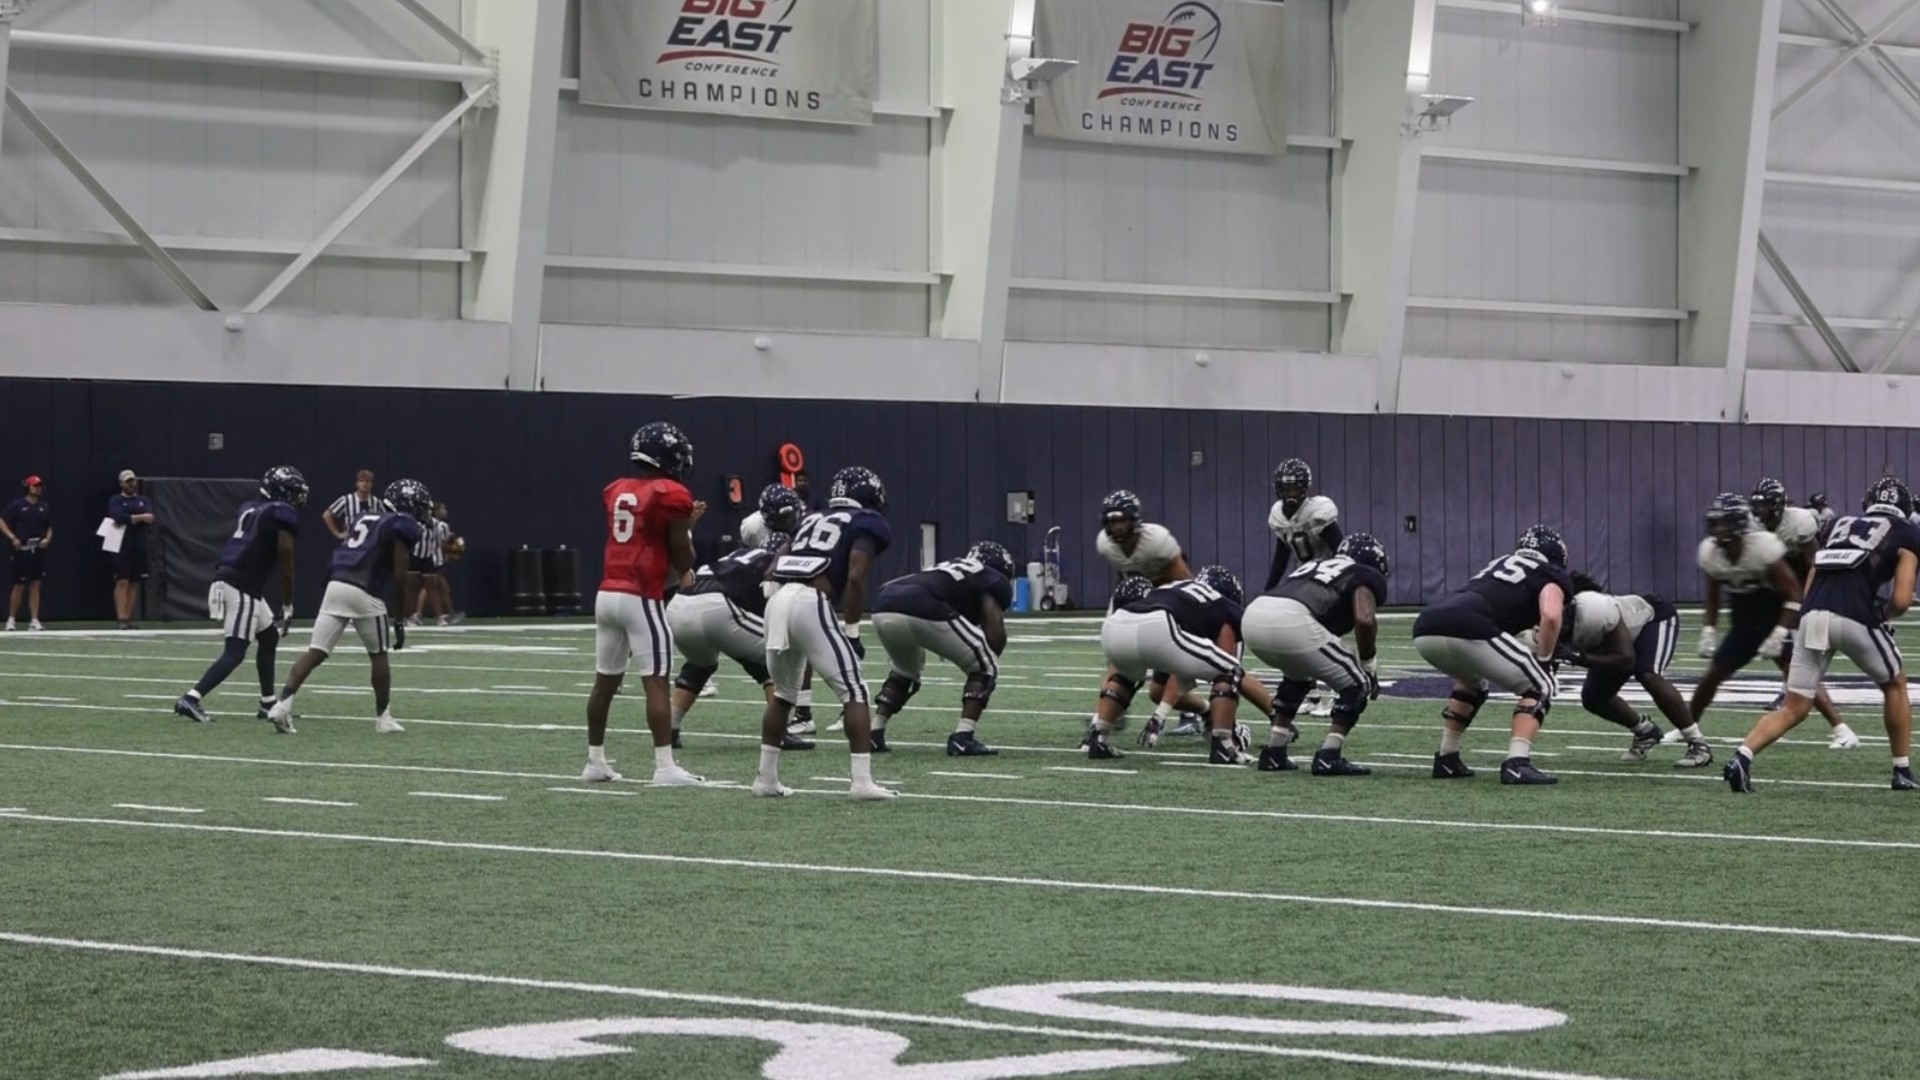 UConn Football held a practice on Tuesday just days ahead of their first game of the 2022 season against Utah St.